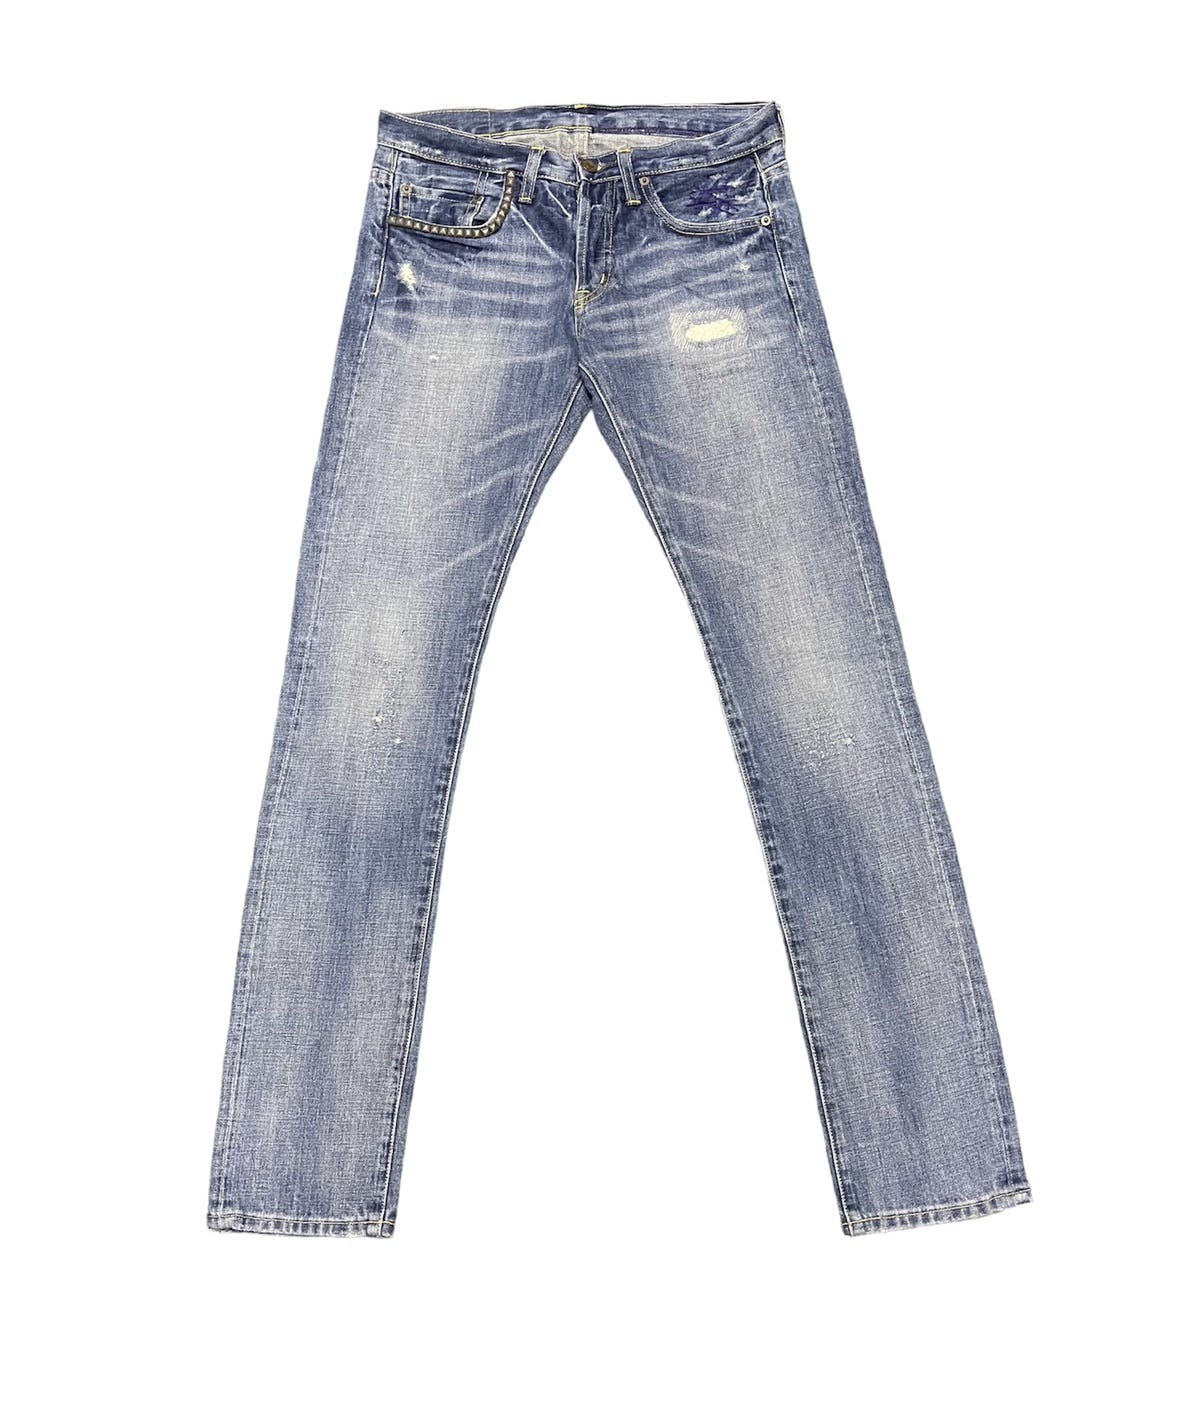 Andy warhol x hysteric glamour distressed jeans - 1